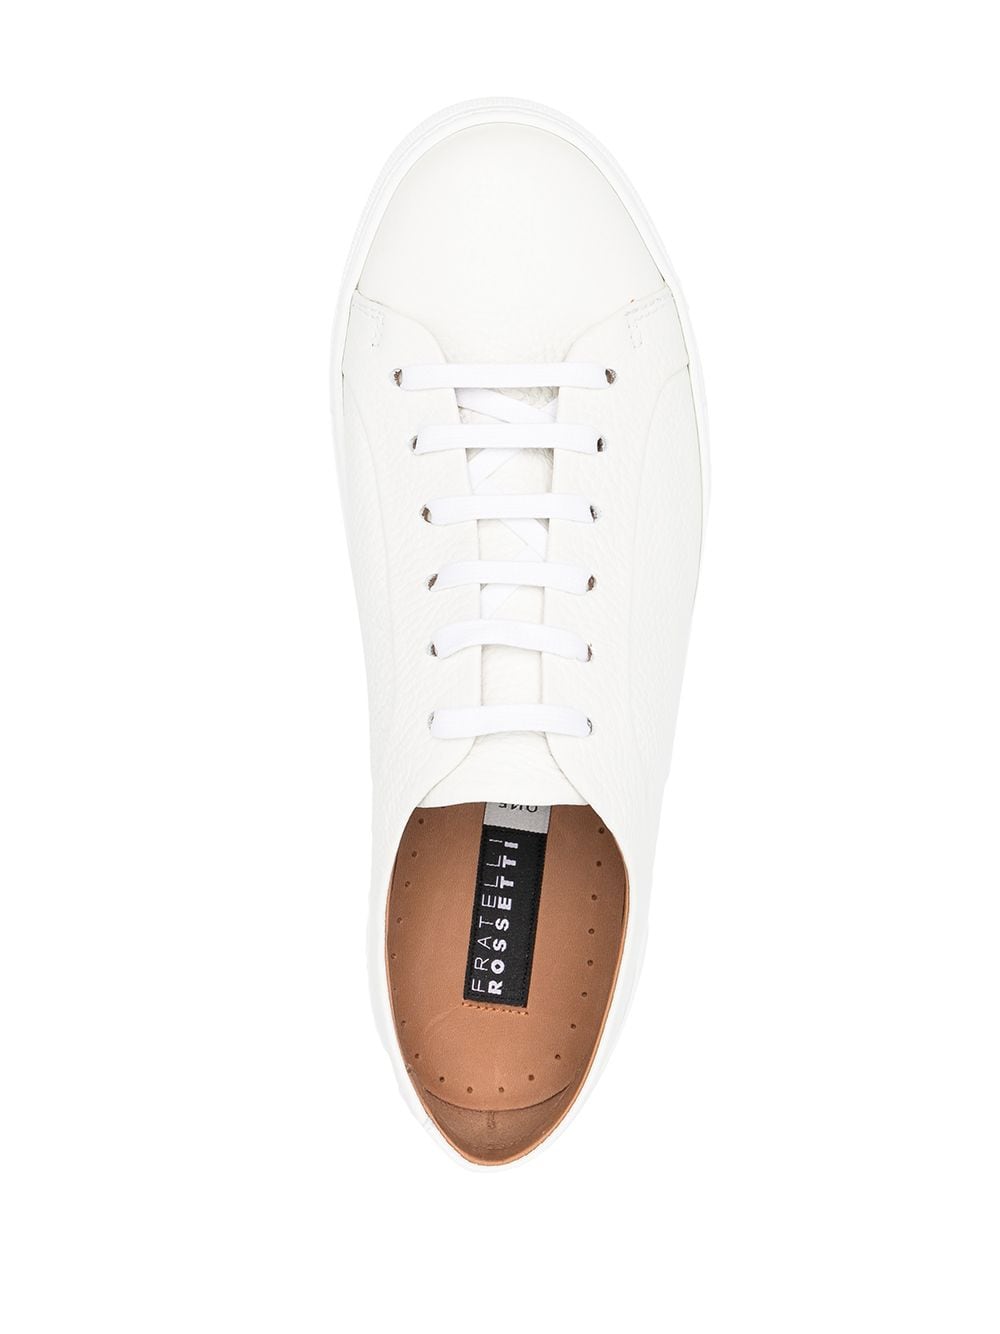 white leather sneaker